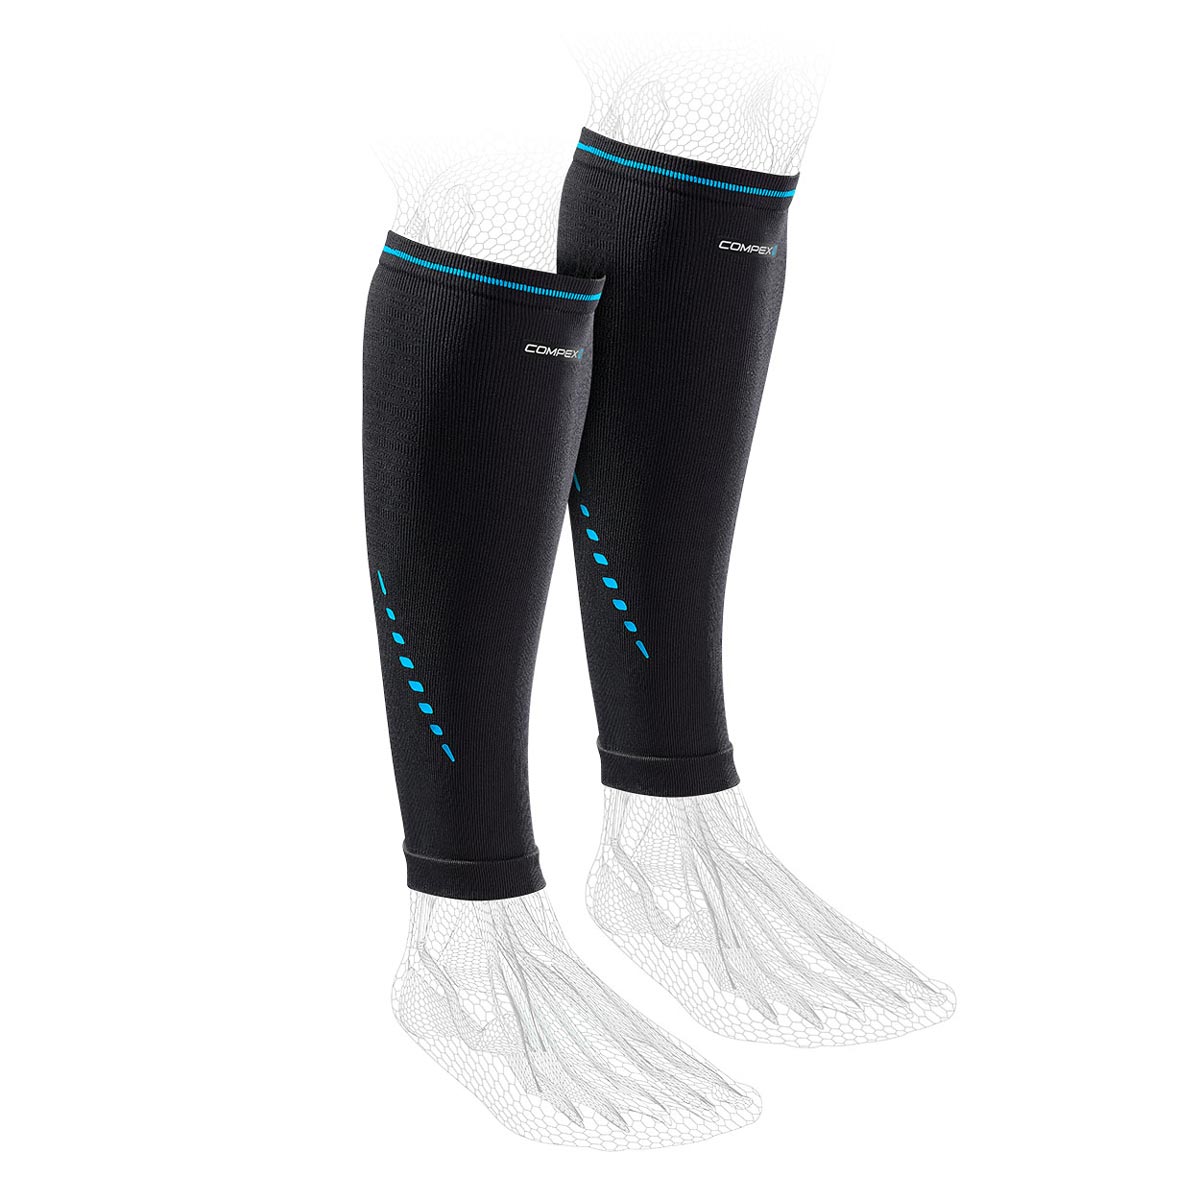 Image of Compex Activ'® Calf sleeves